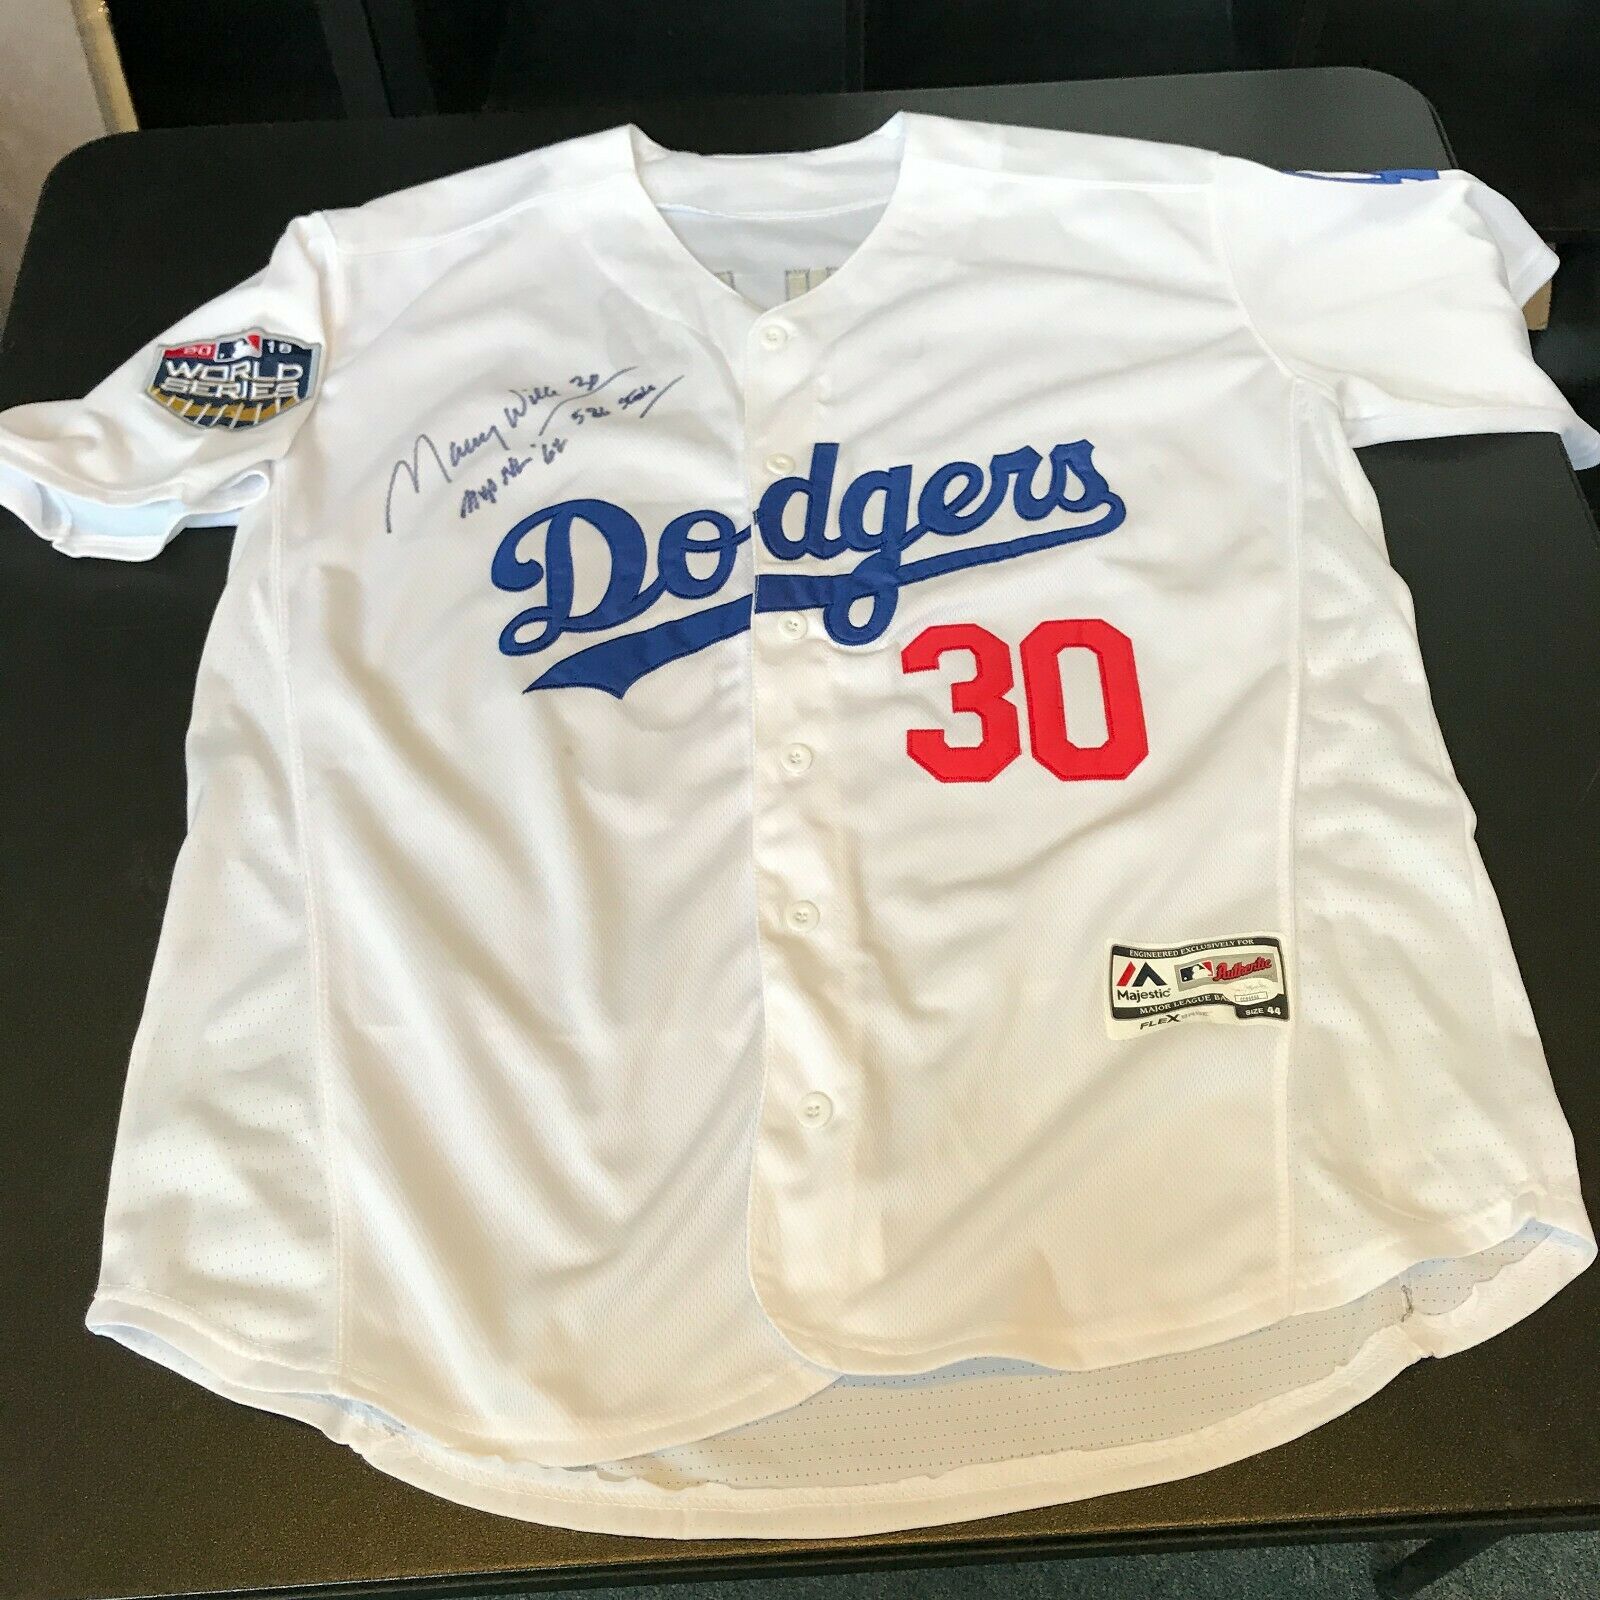 Sandy Koufax Signed Autographed Brooklyn Dodgers Jersey Inscribed